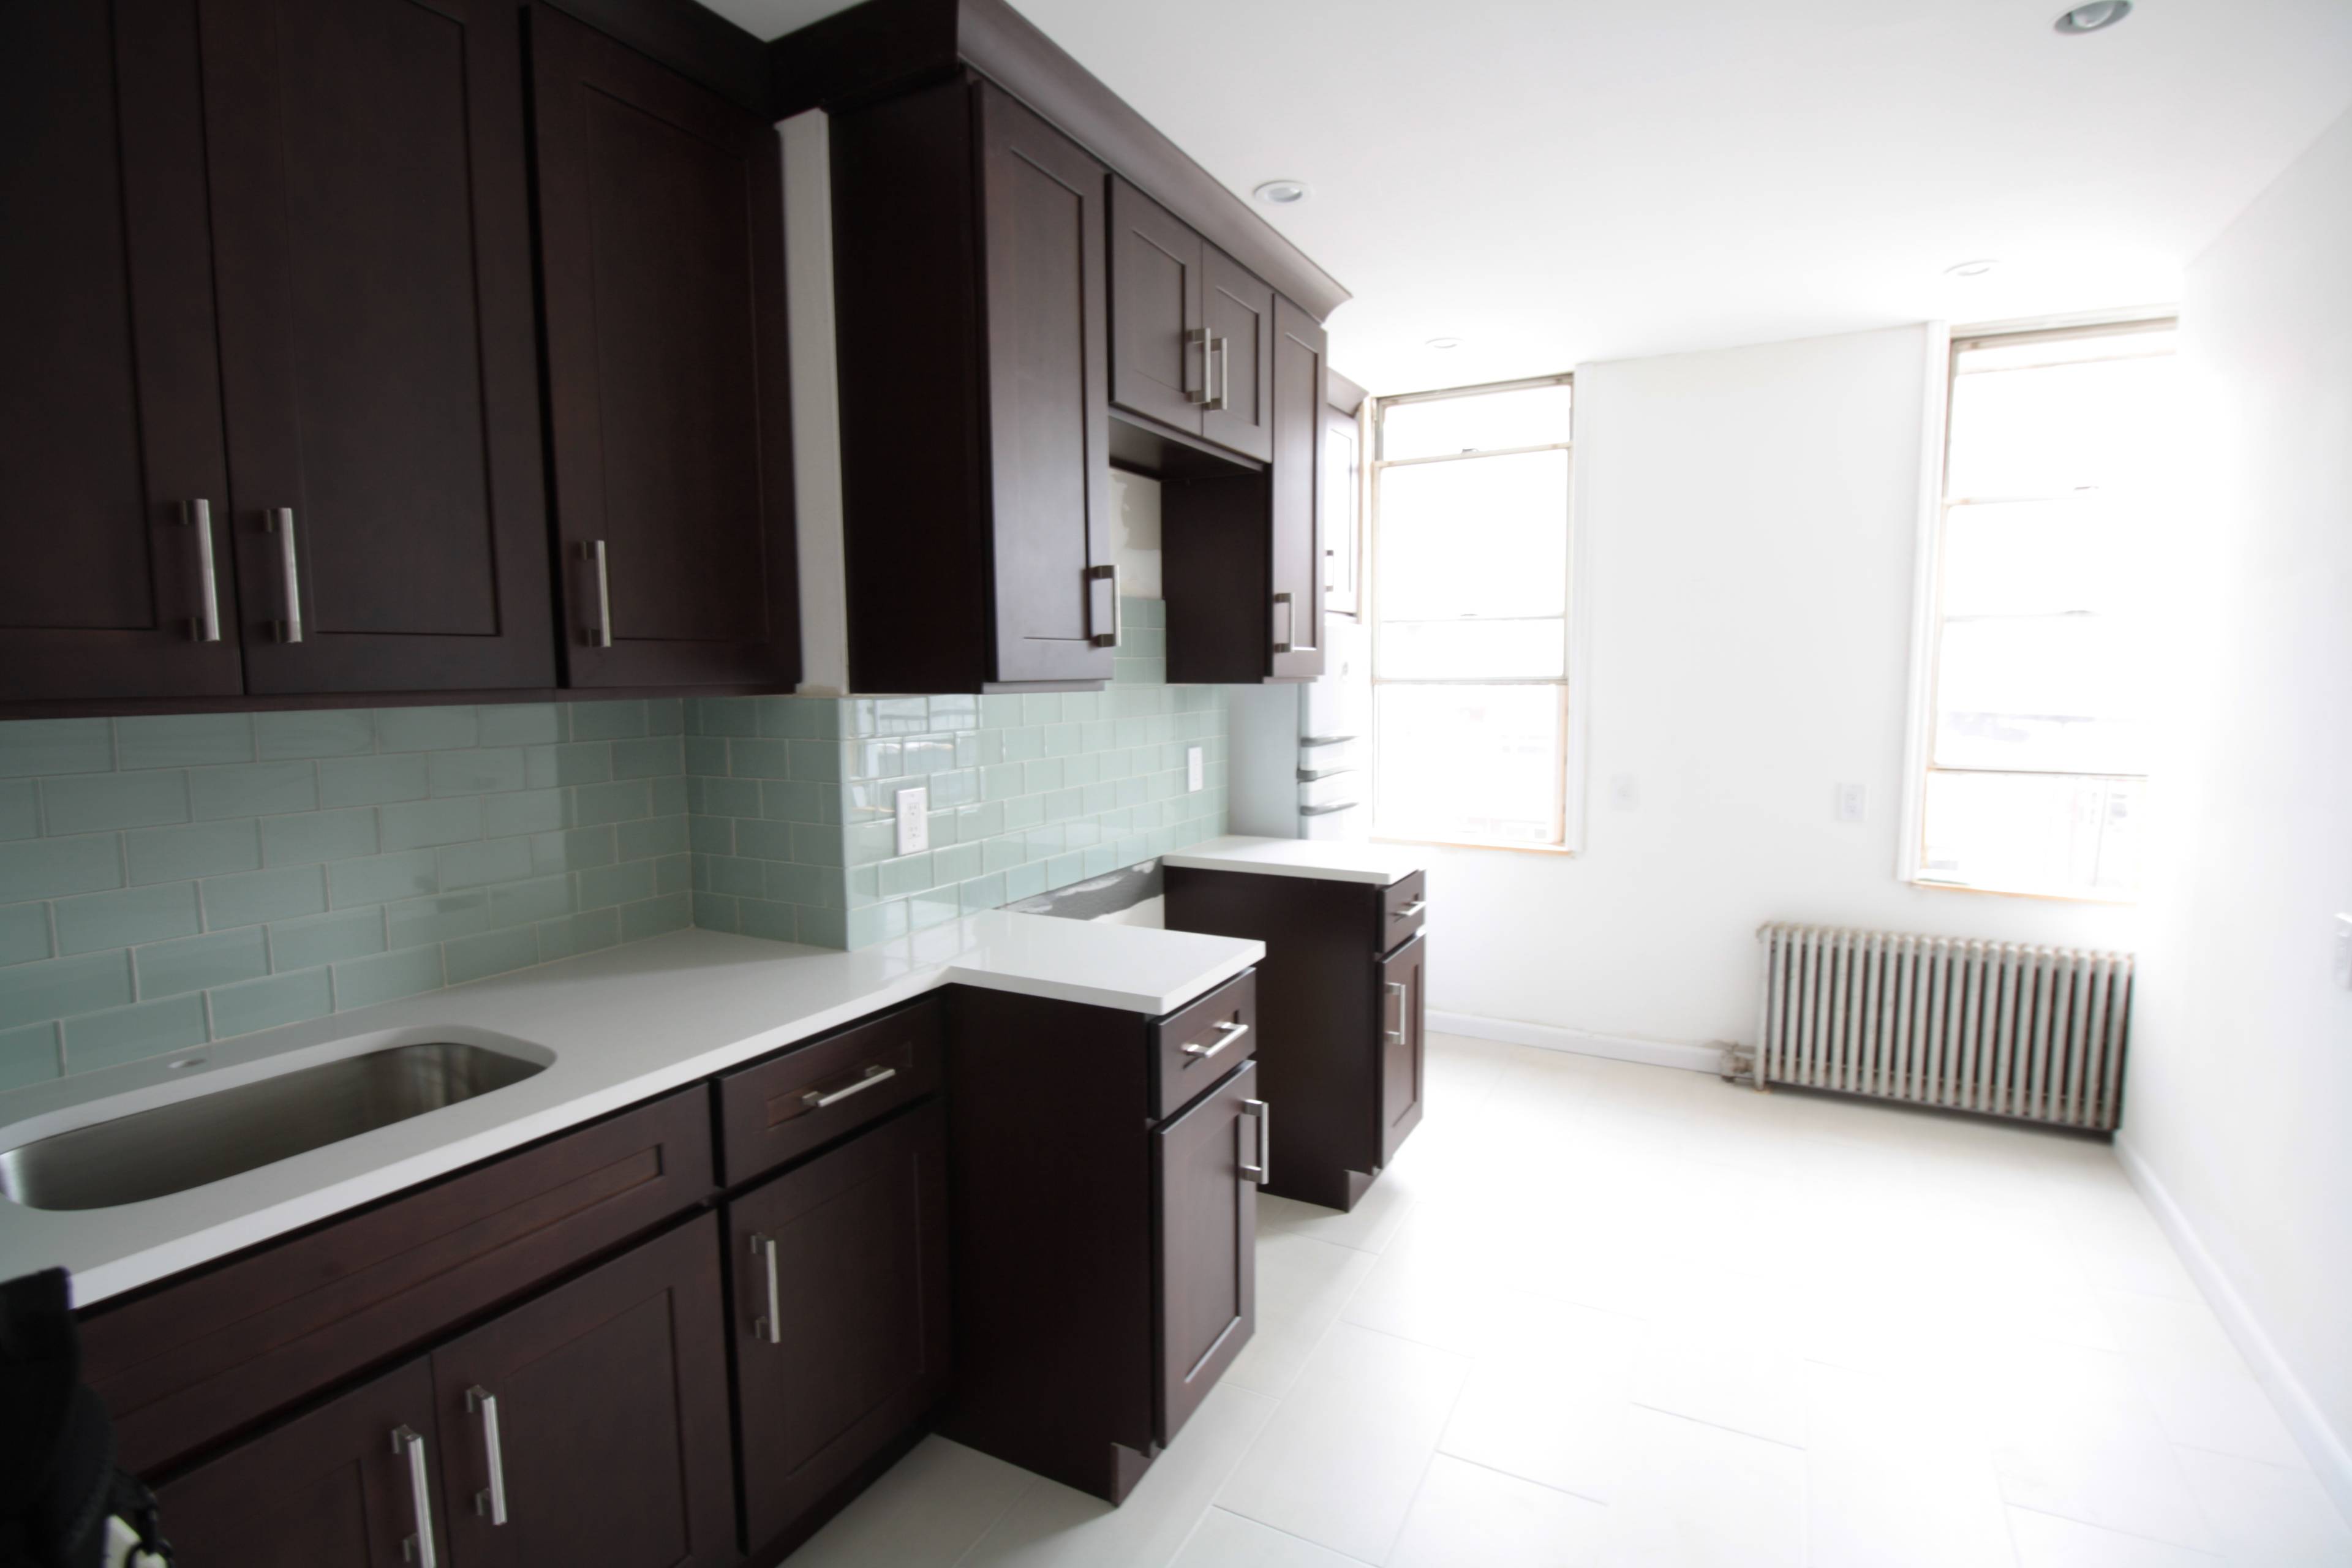 BRAND NEW RENOVATED, LARGE 1-BED aparmtnet in the heart of WILLIAMSBURG, BROOKLYN!